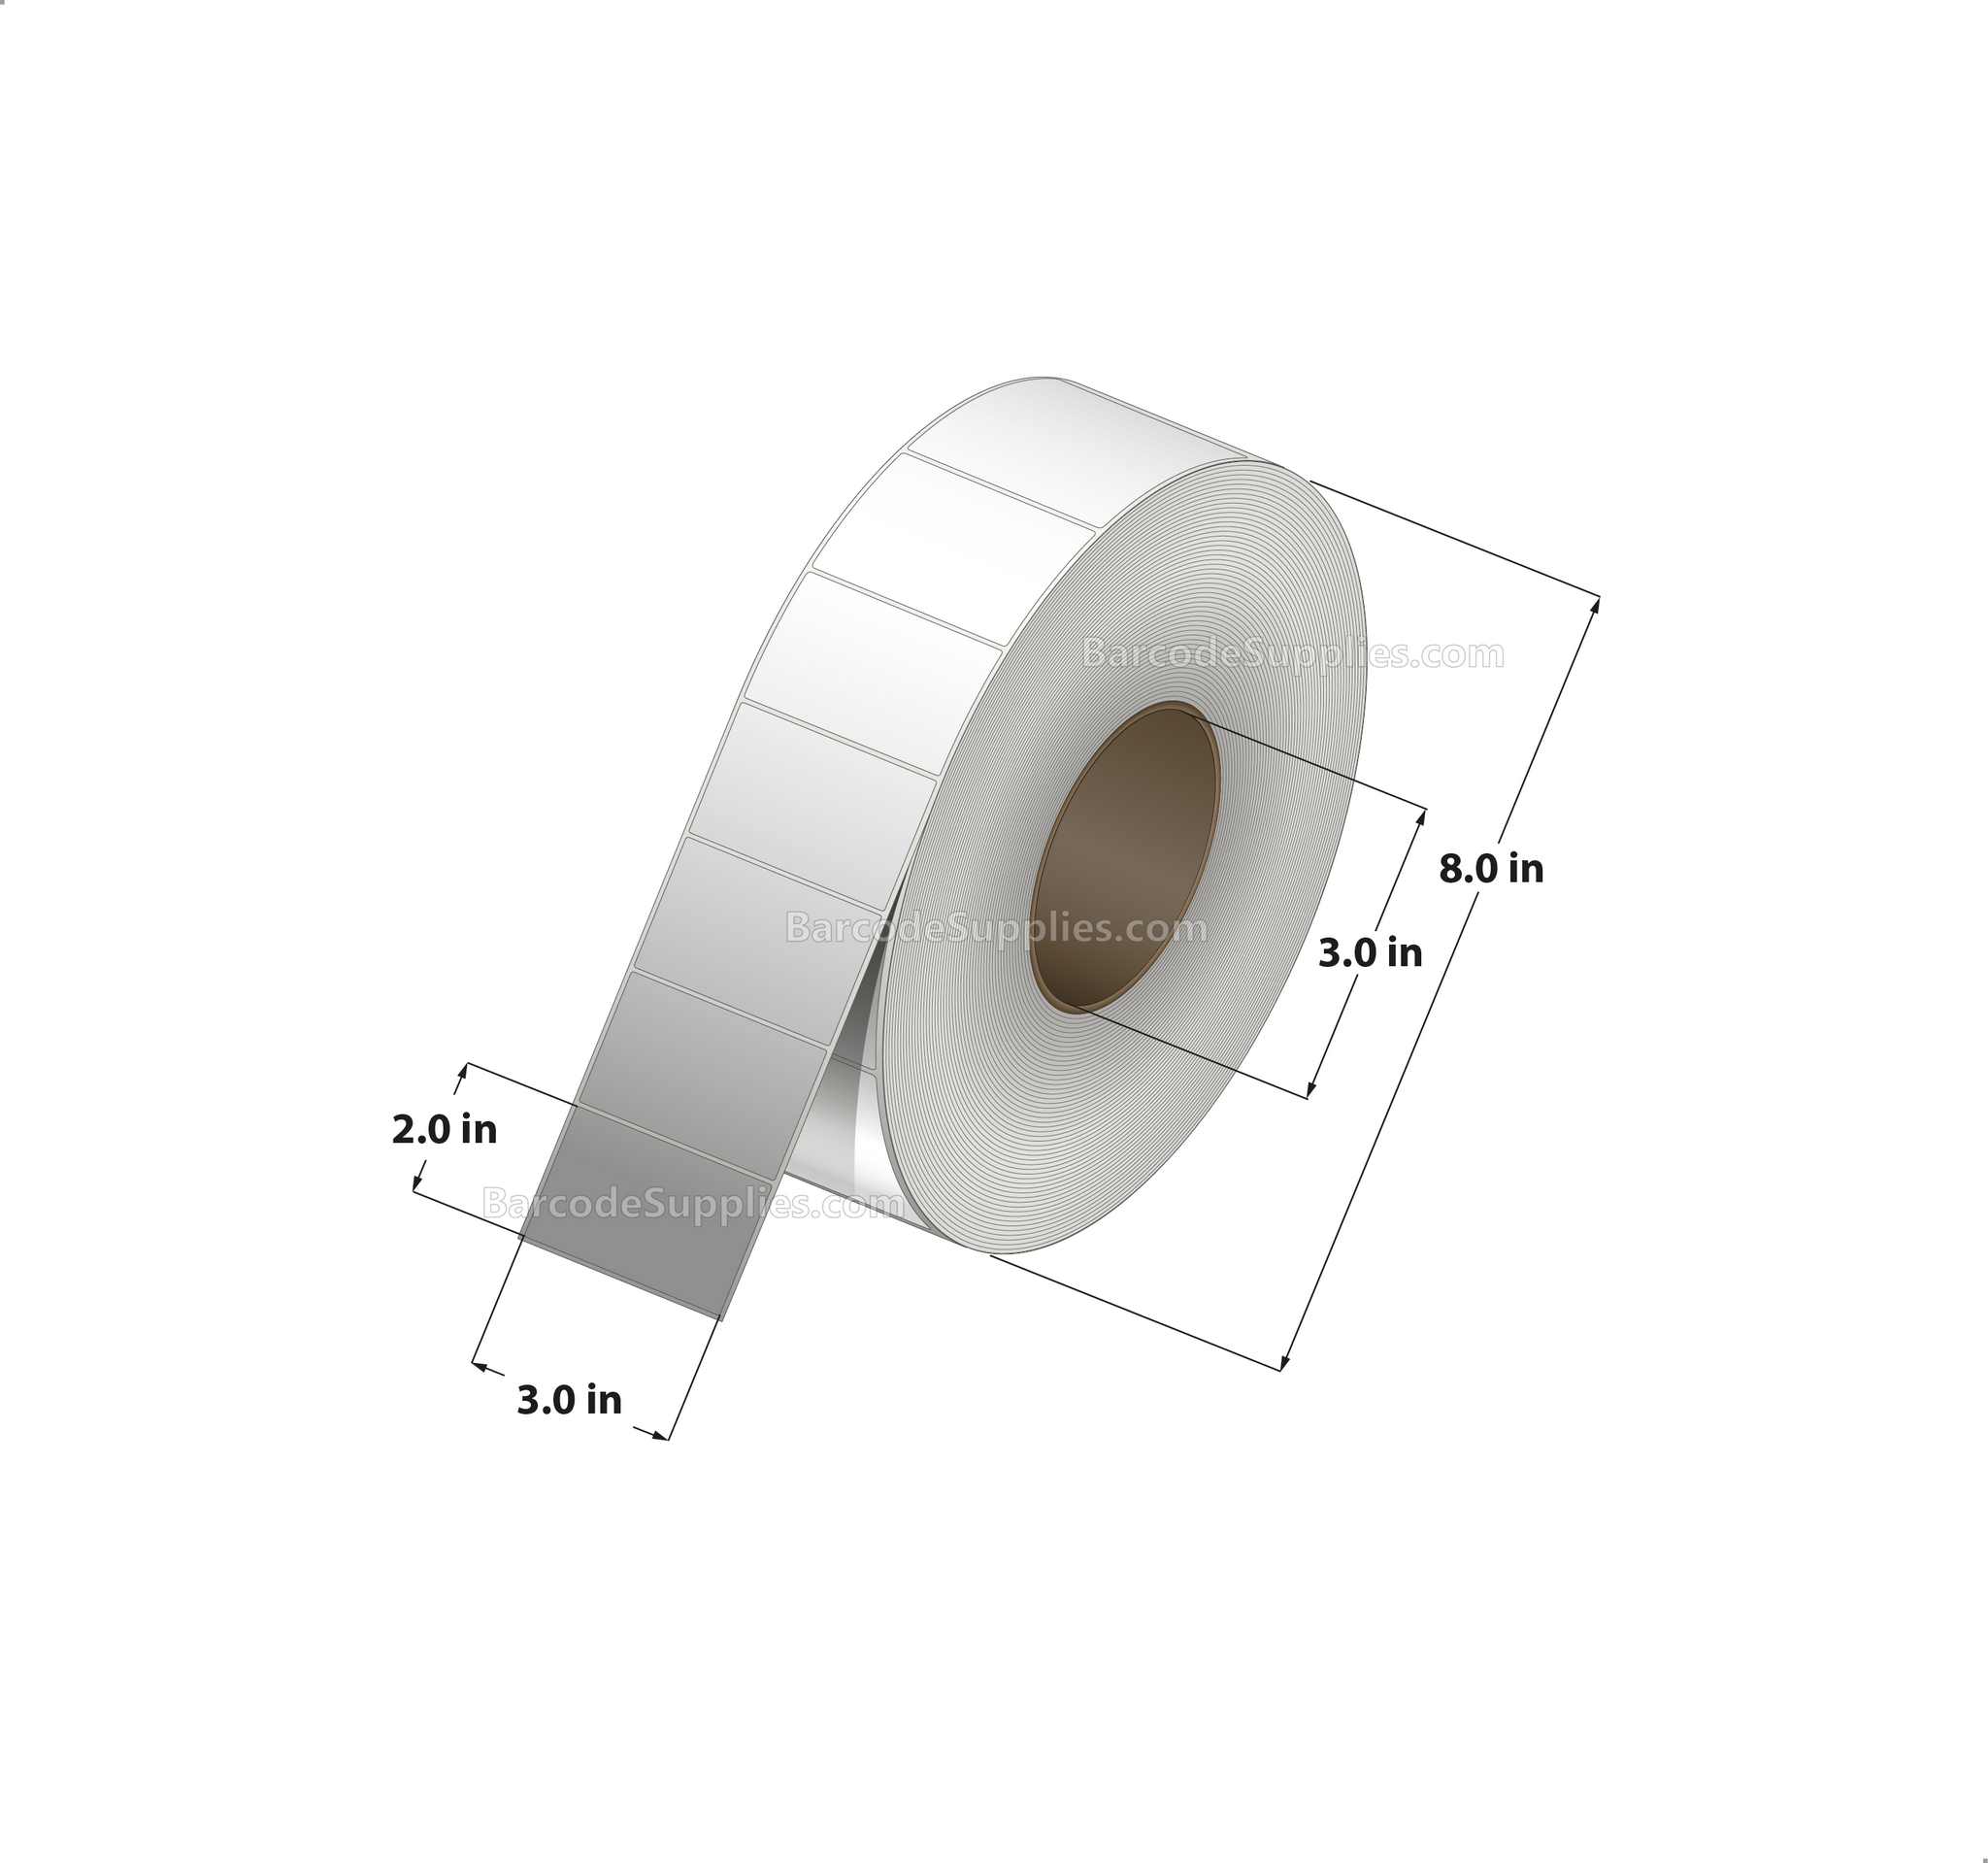 3 x 2 Thermal Transfer White Labels With Permanent Acrylic Adhesive - Not Perforated - 3000 Labels Per Roll - Carton Of 6 Rolls - 18000 Labels Total - MPN: TH32-1